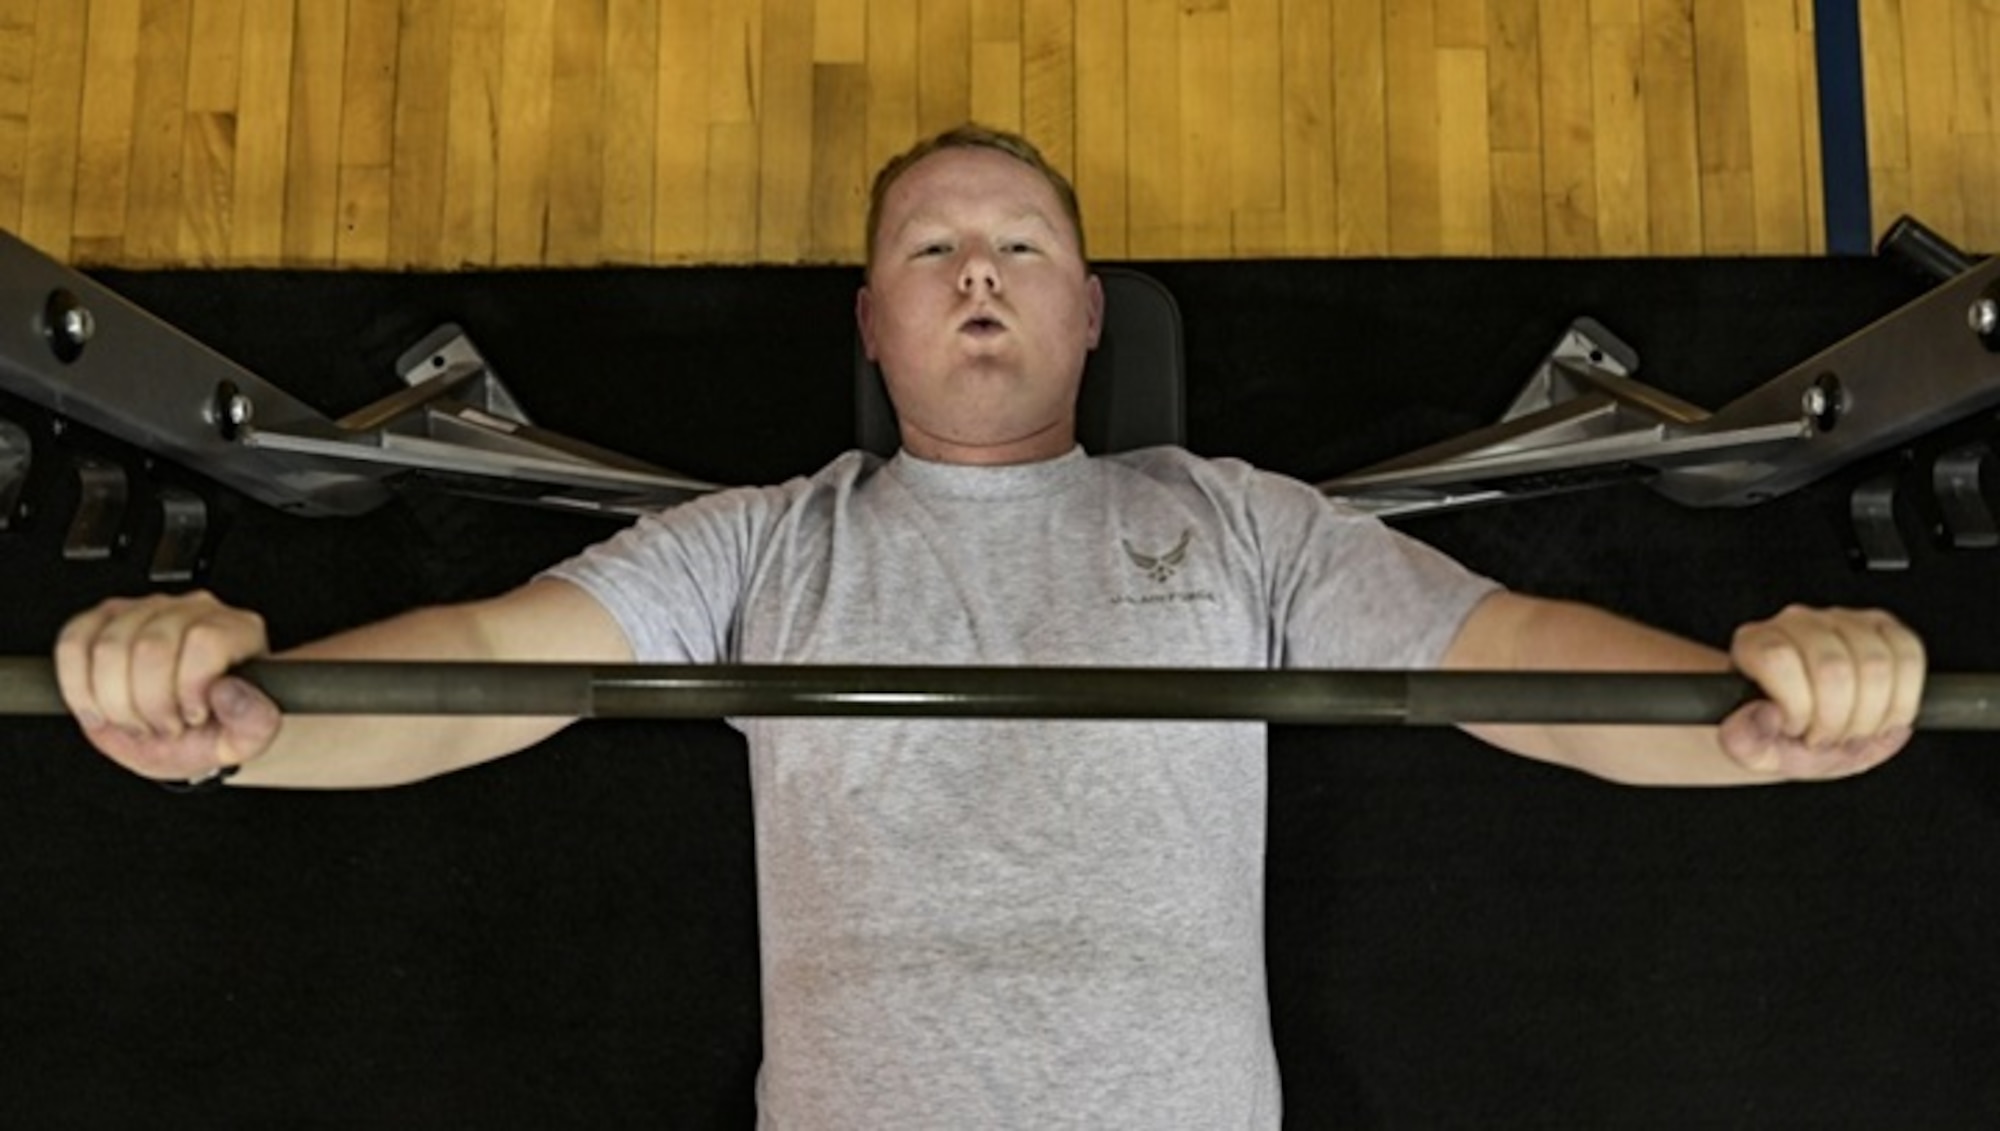 Image of an Airman lifting a barbell.